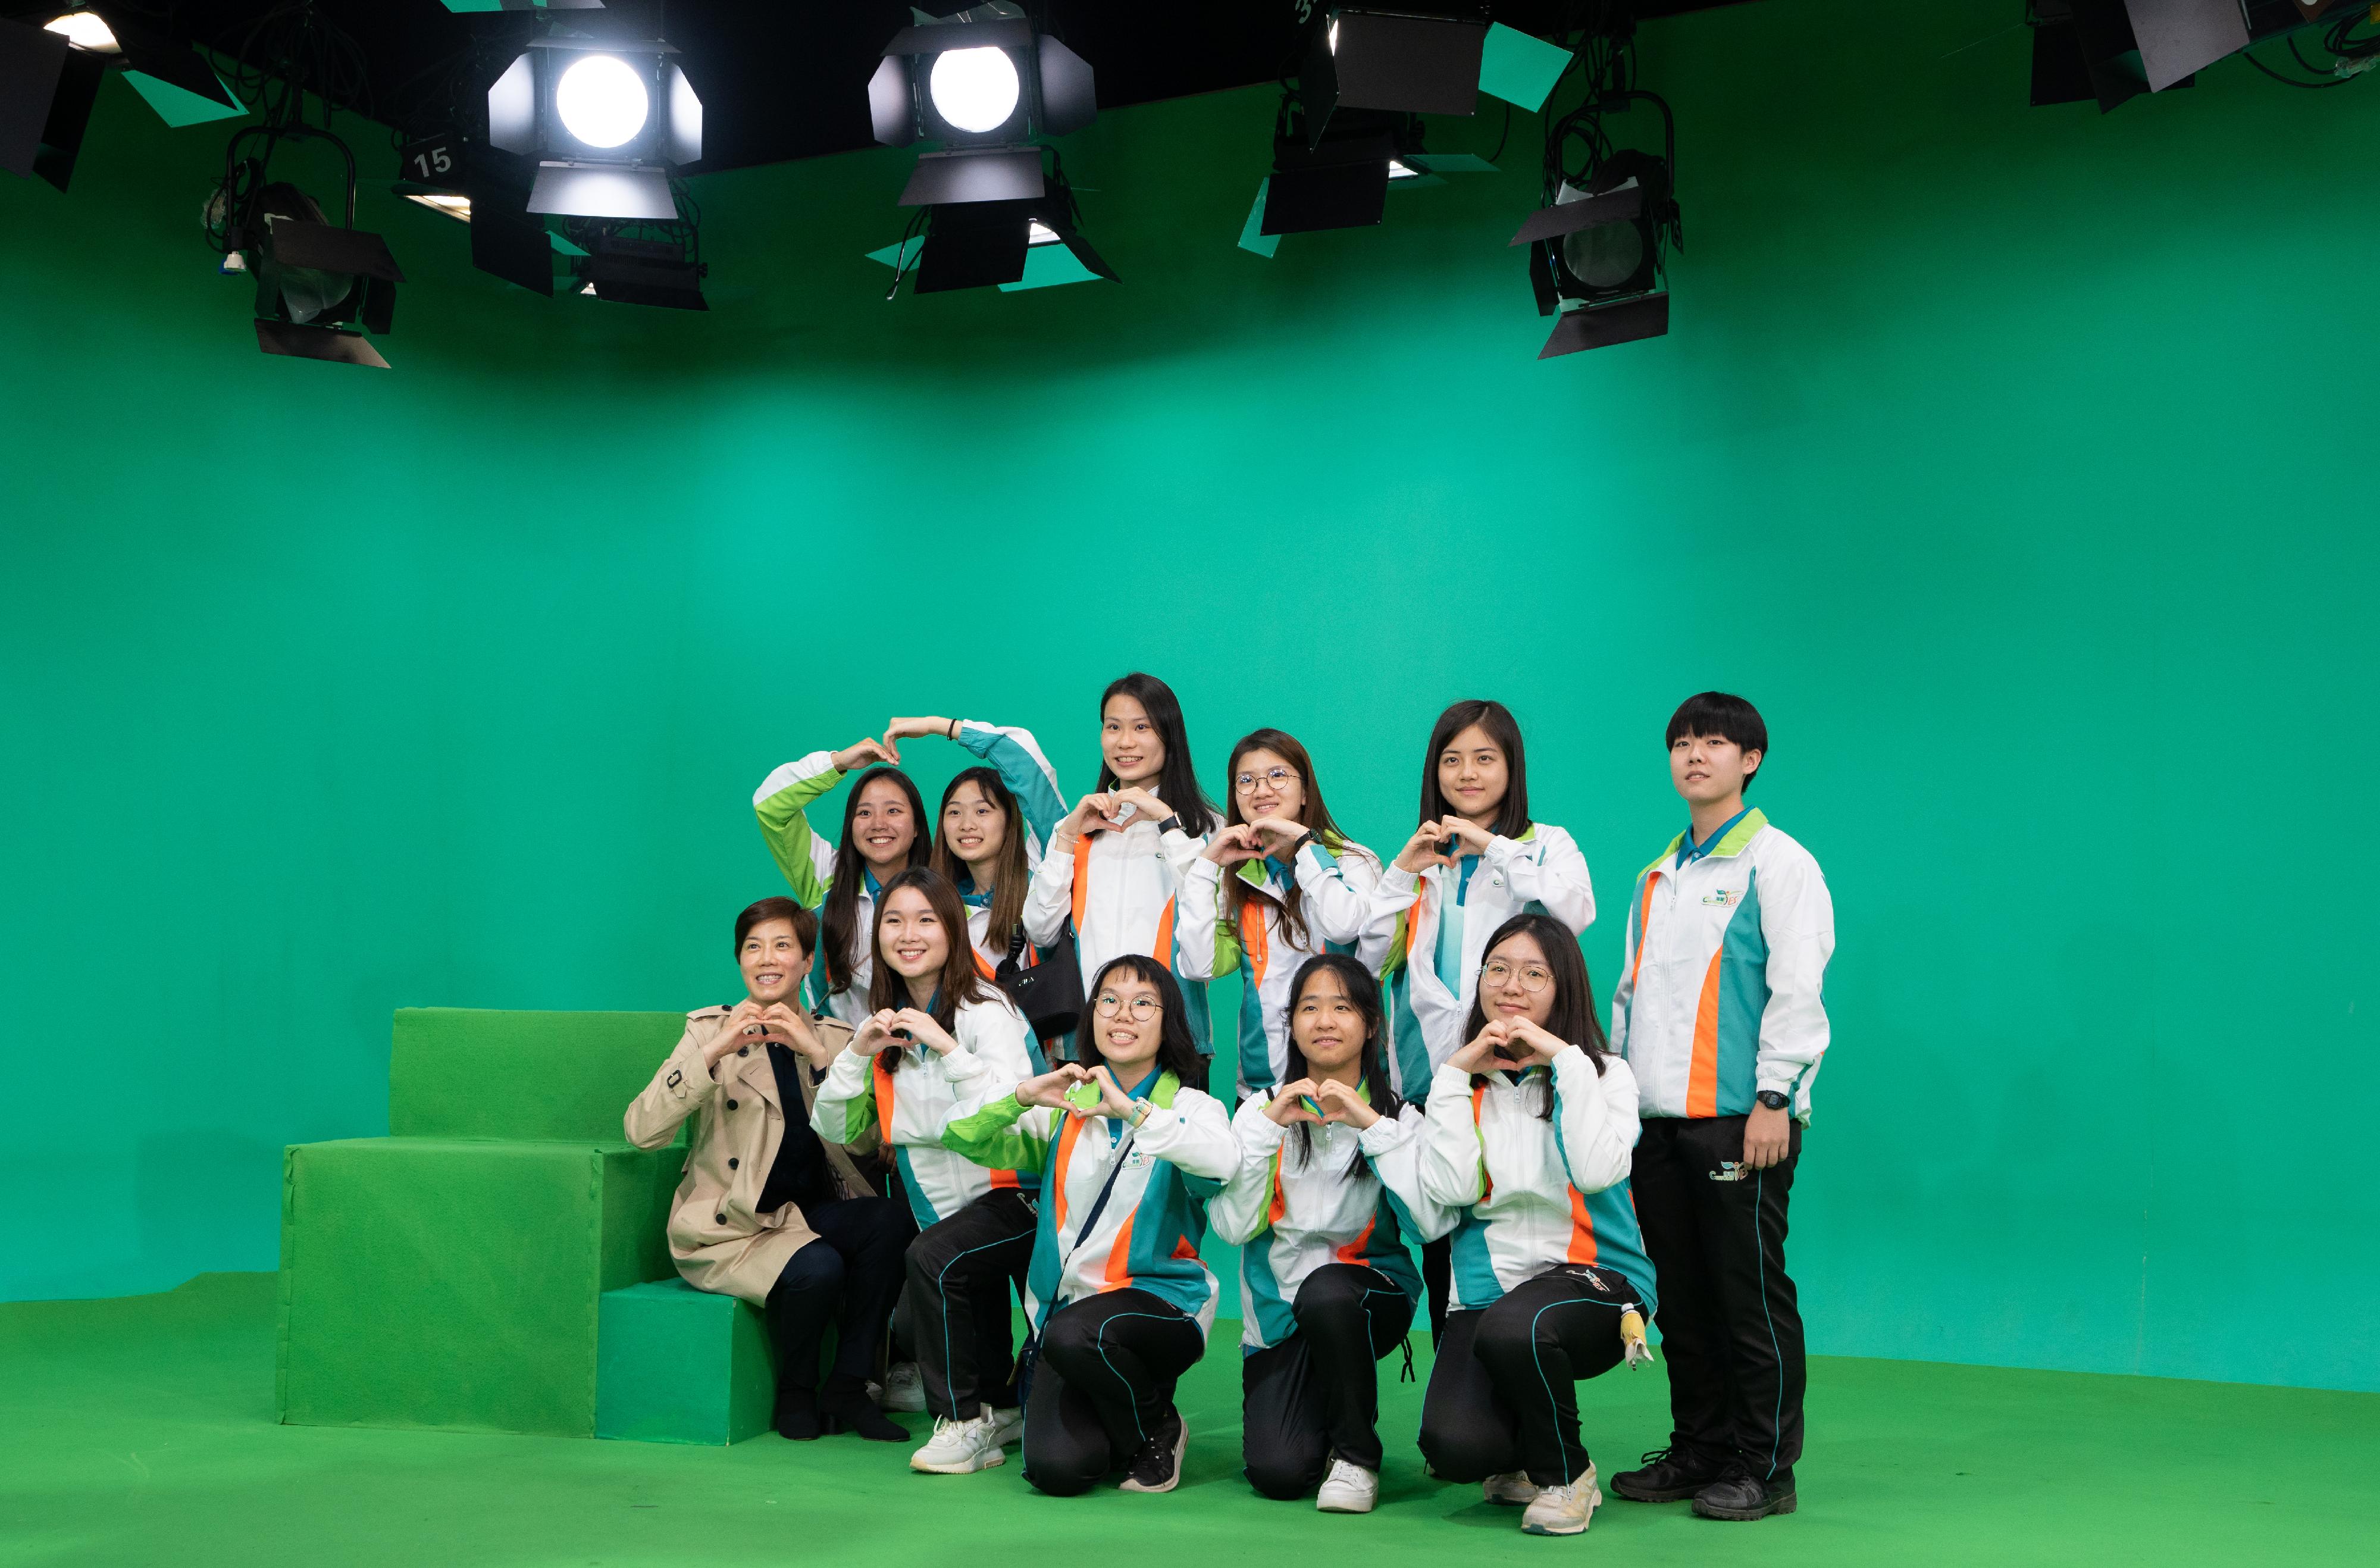 The Commissioner of Customs and Excise, Ms Louise Ho (first left), led 36 youth members of "Customs YES" to visit the headquarters of Shenzhen Media Group on March 19.